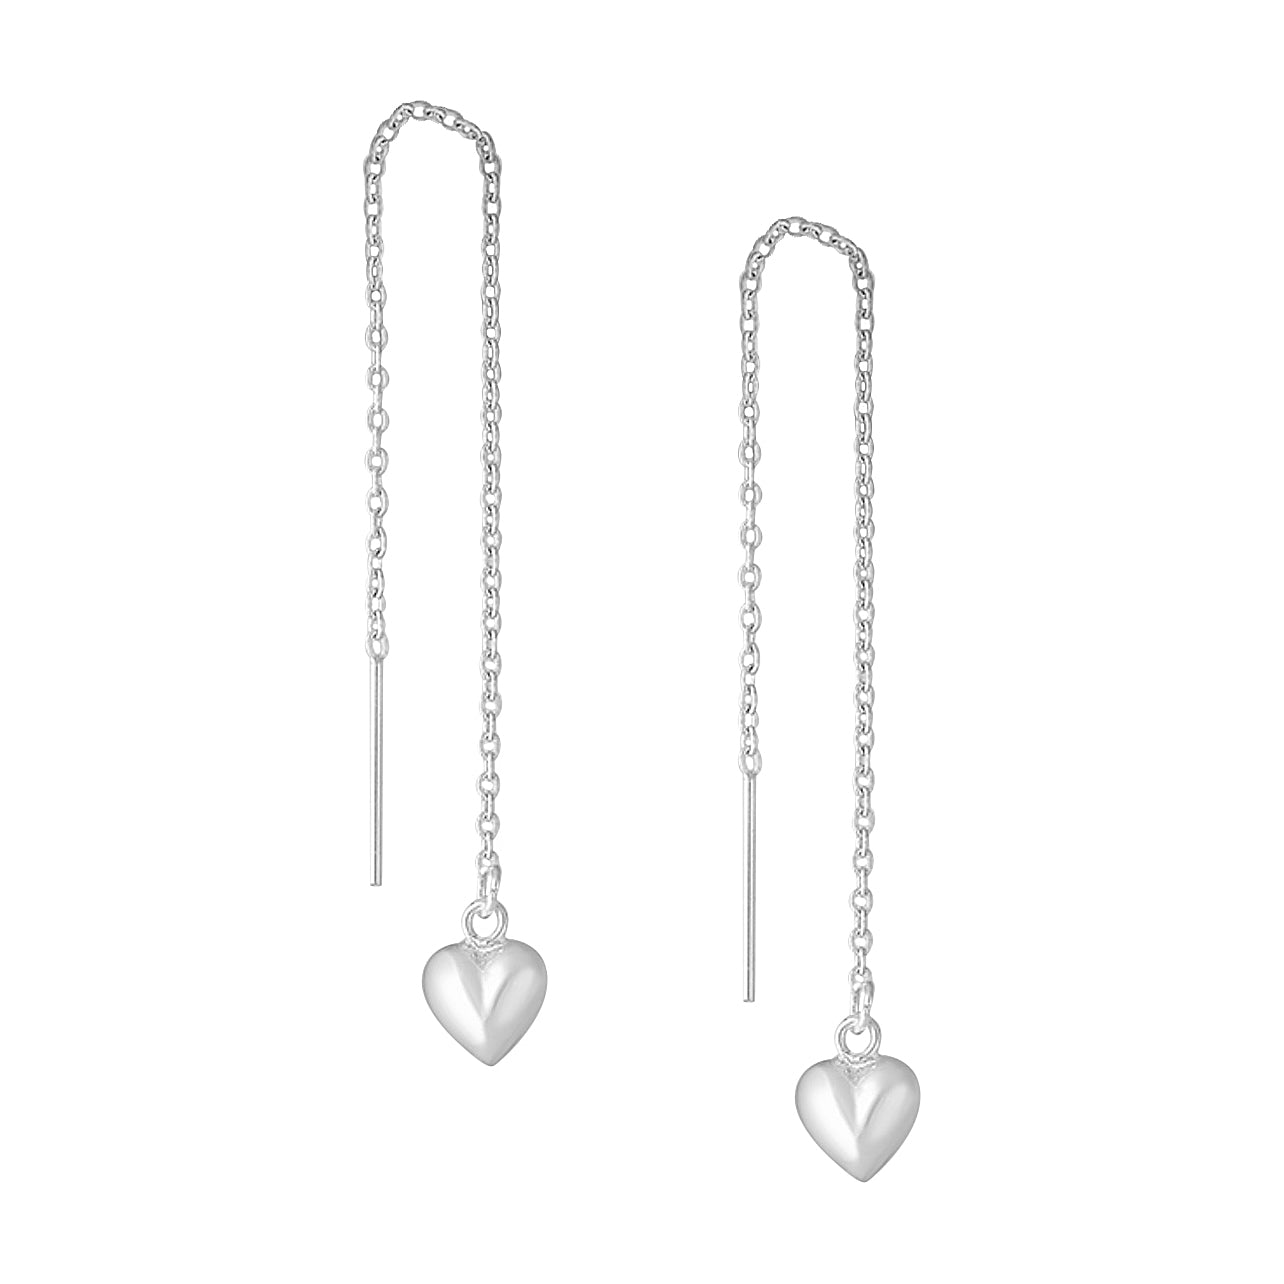 Sterling Silver Threader Earrings with Puffed Heart Charm